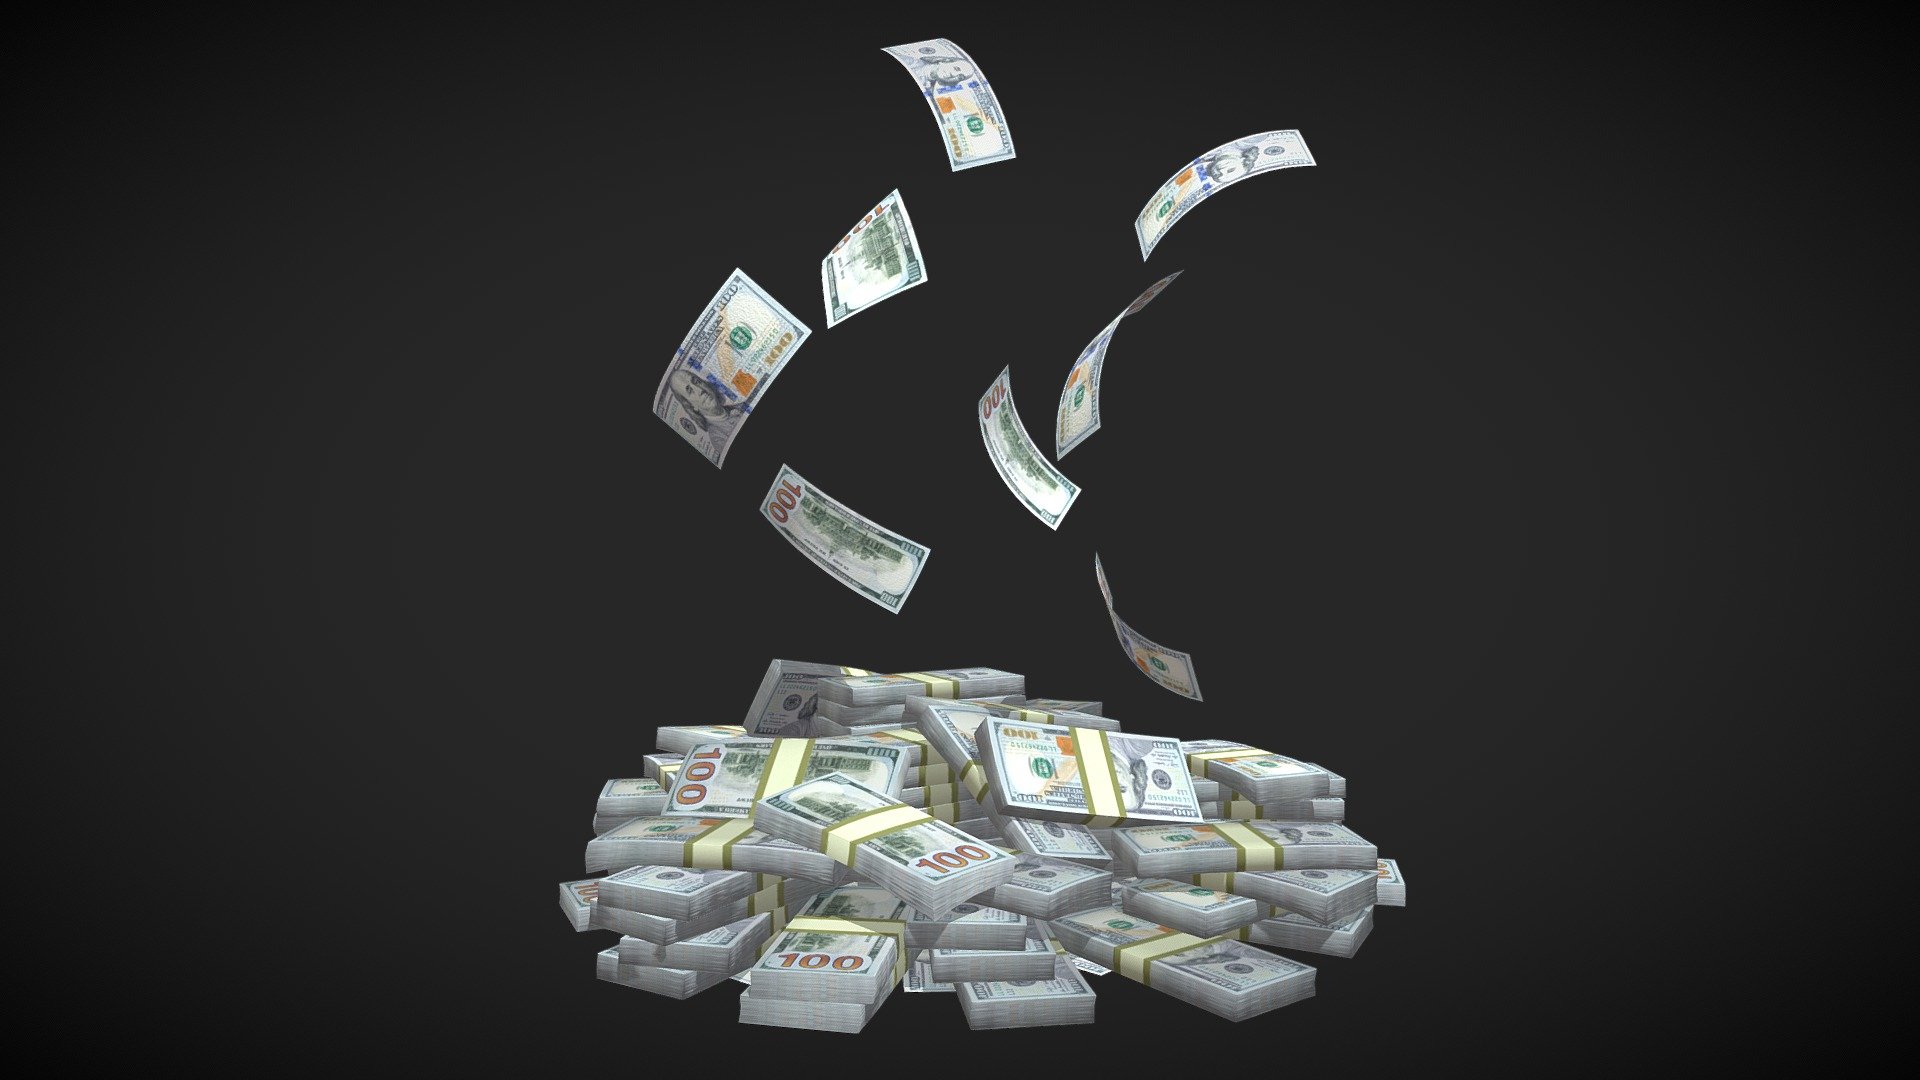 GENERAL




Used units: cm; 65cm high and 63cm wide

Rendered with Corona Render or Scanline

Money - This is a high poly model of a array of money.
There is also a low poly model.

FILE FORMATS




MAX (3dsmax 2017)

FBX (embedded textures)

OBJ

SPECIFICATION




Objects are layered

The model consists of 6 types of stacks:

Heaps_1

Heaps_2

Flat

Dynamic

Below

Flying

TEXTURES




All textures are in PNG format (2048x2048).

GEOMETRY

High poly model:
Polygons: 3 653 376
Triangles: 7 306 752
Vertices: 3 664 508

Low poly model:
Polygons: 27 762
Triangles: 54 780
Vertices: 27 602



Best wishes for your creative project,
3D GEN Studio 3d model